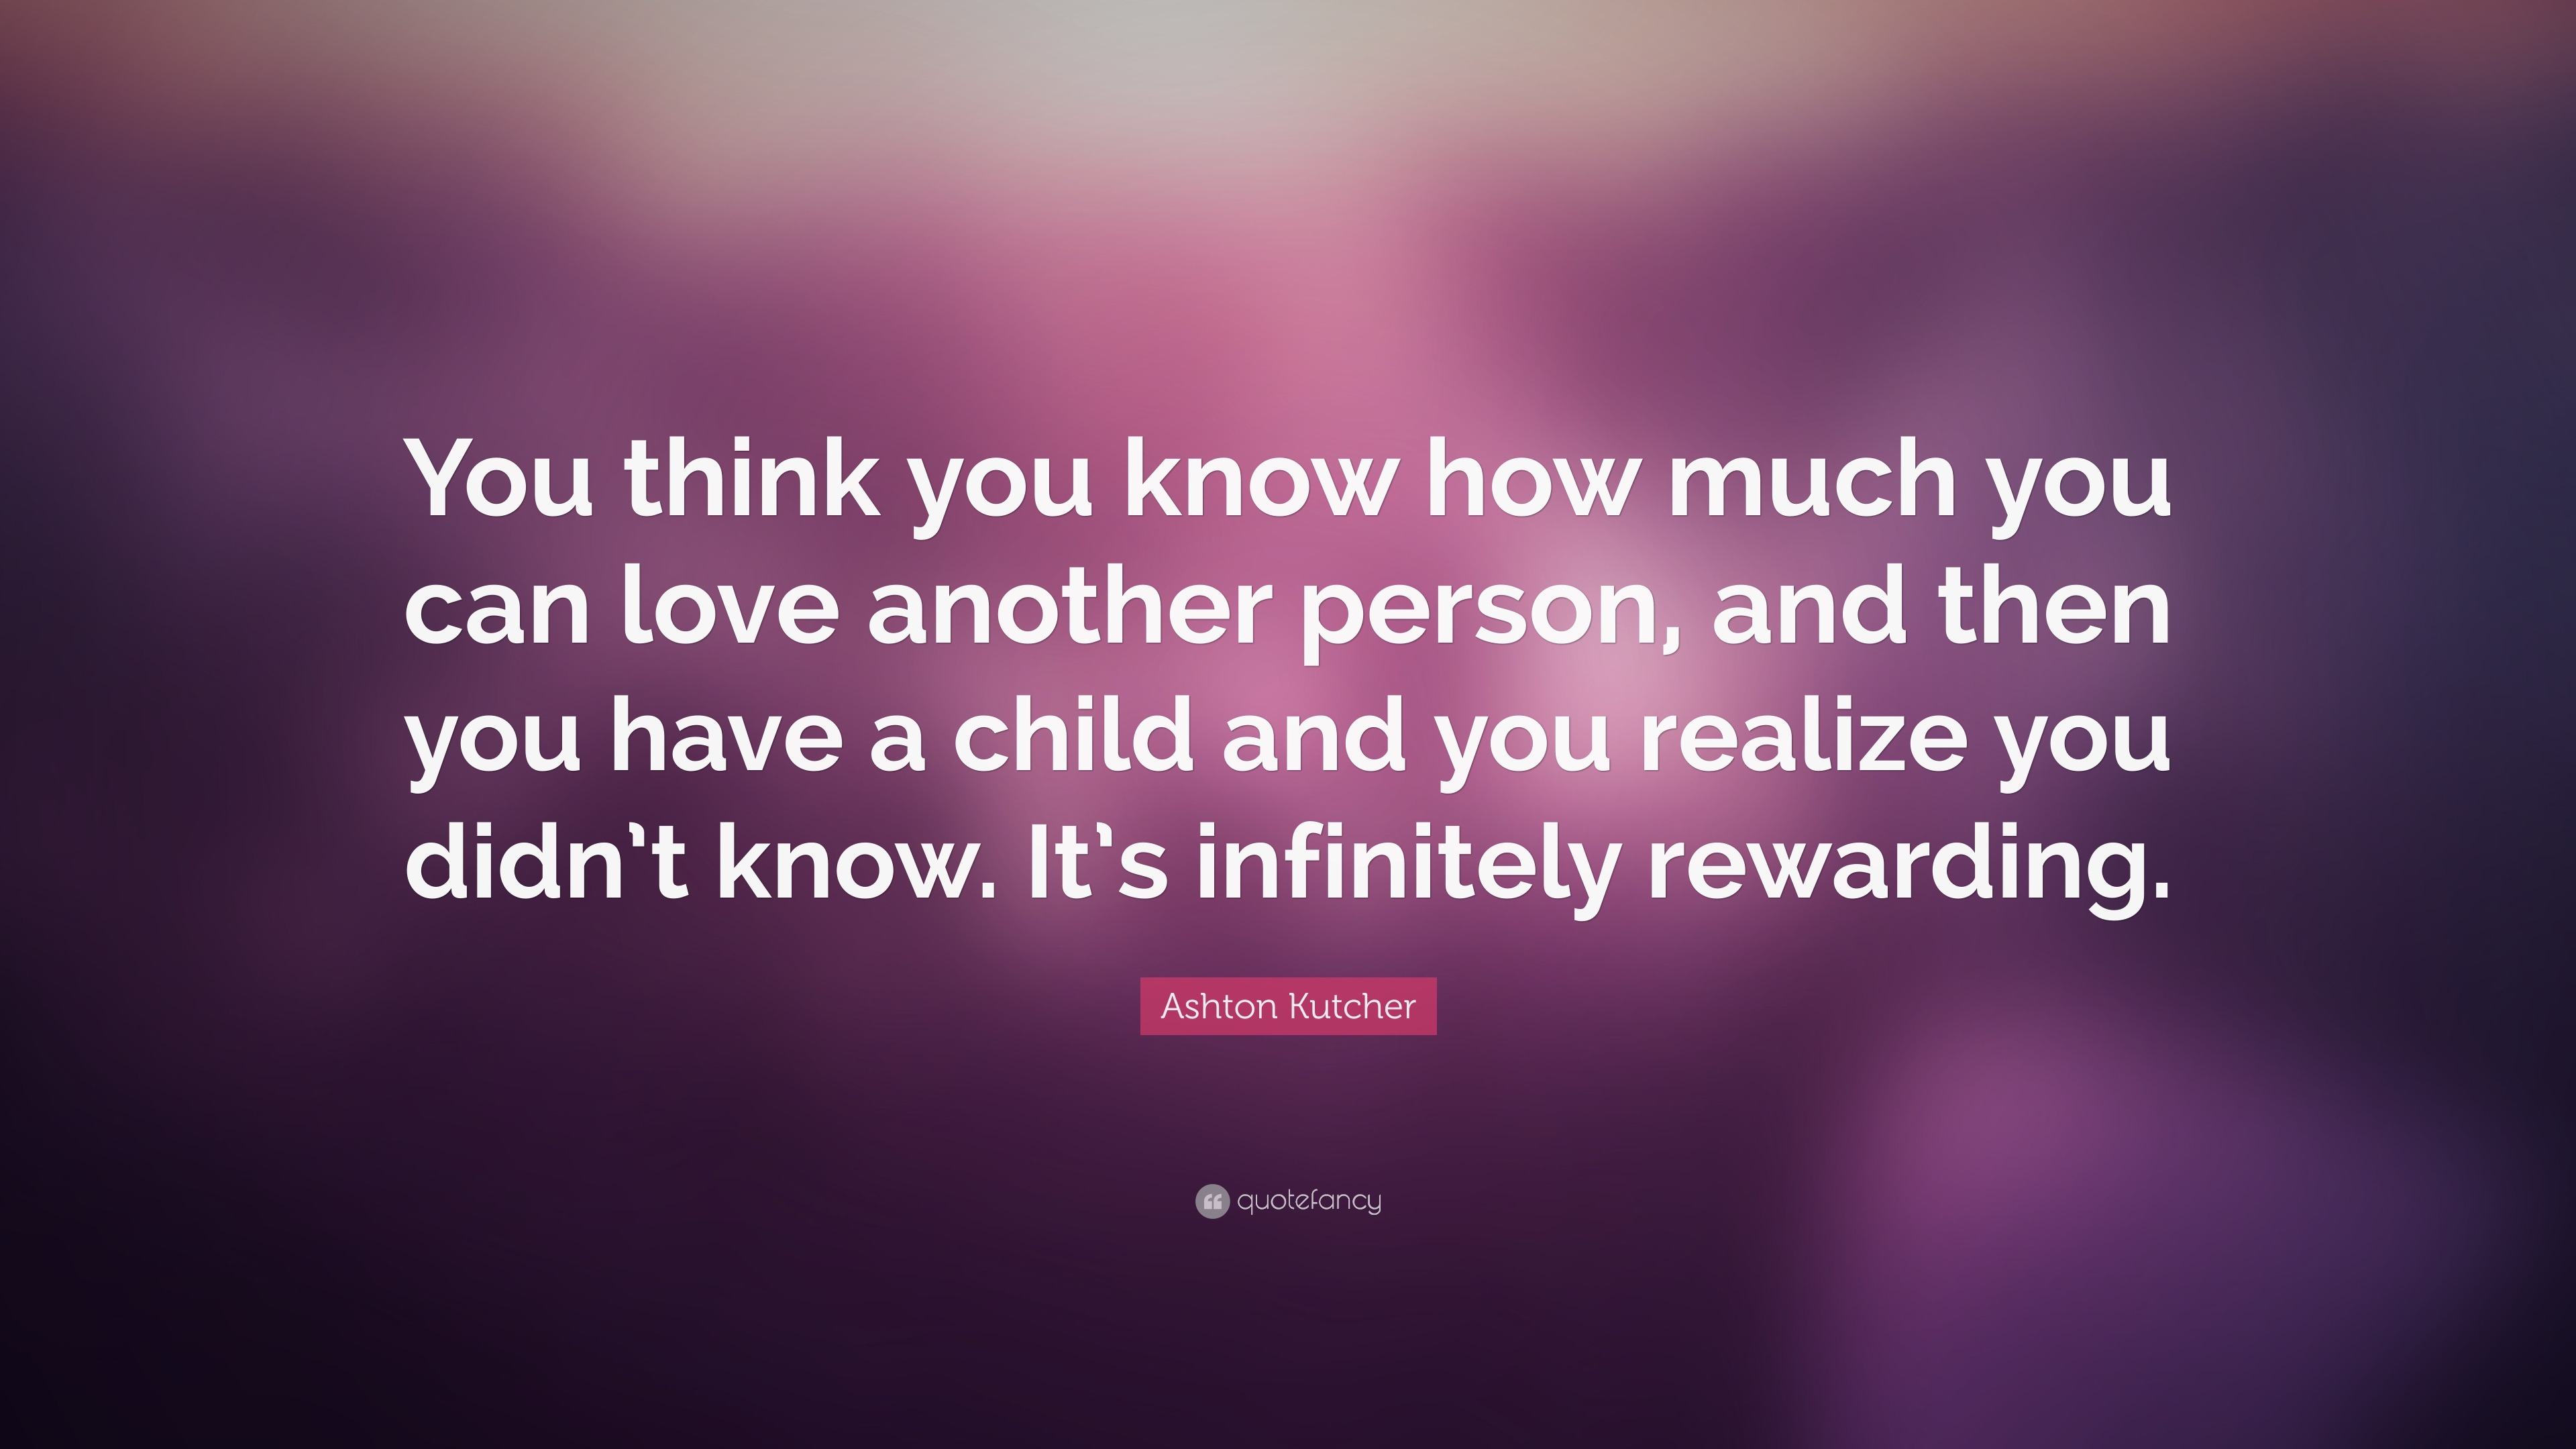 Ashton Kutcher Quote “You think you know how much you can love another person